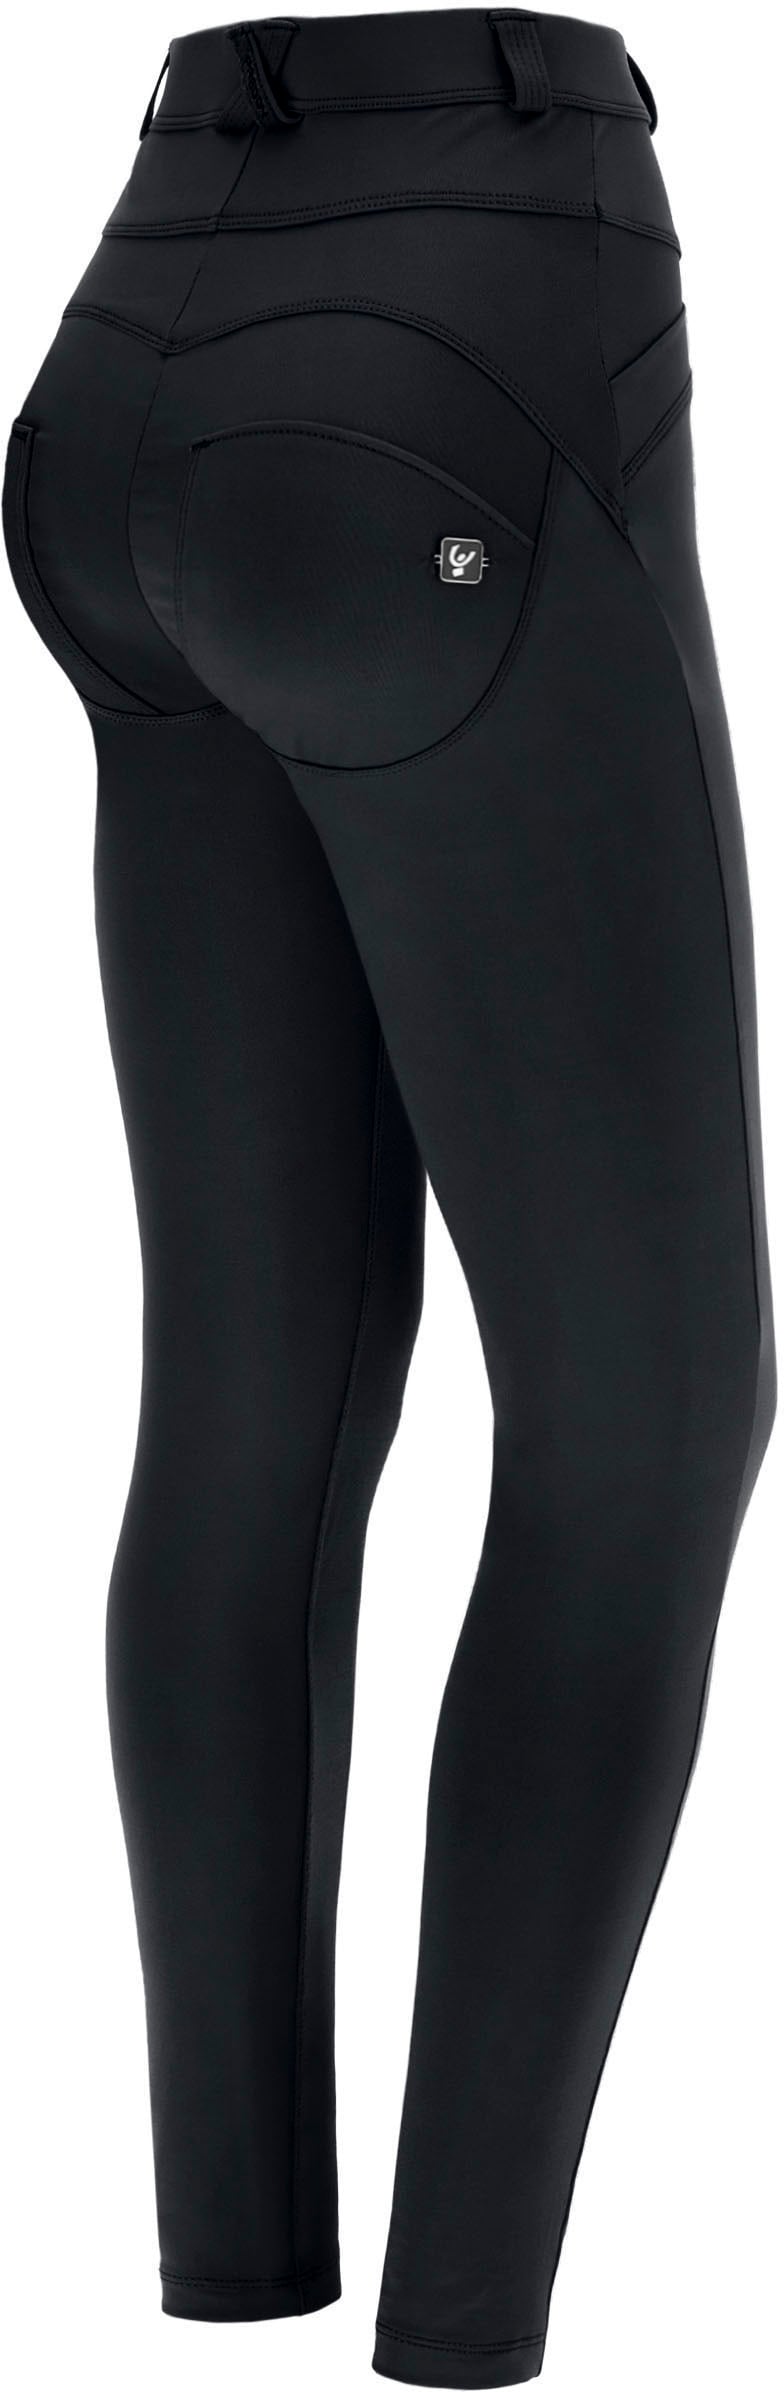 OTTOversand Shaping Freddy »WRUP2 bei Lifting & Jeggings SUPERSKINNY«, Effekt mit